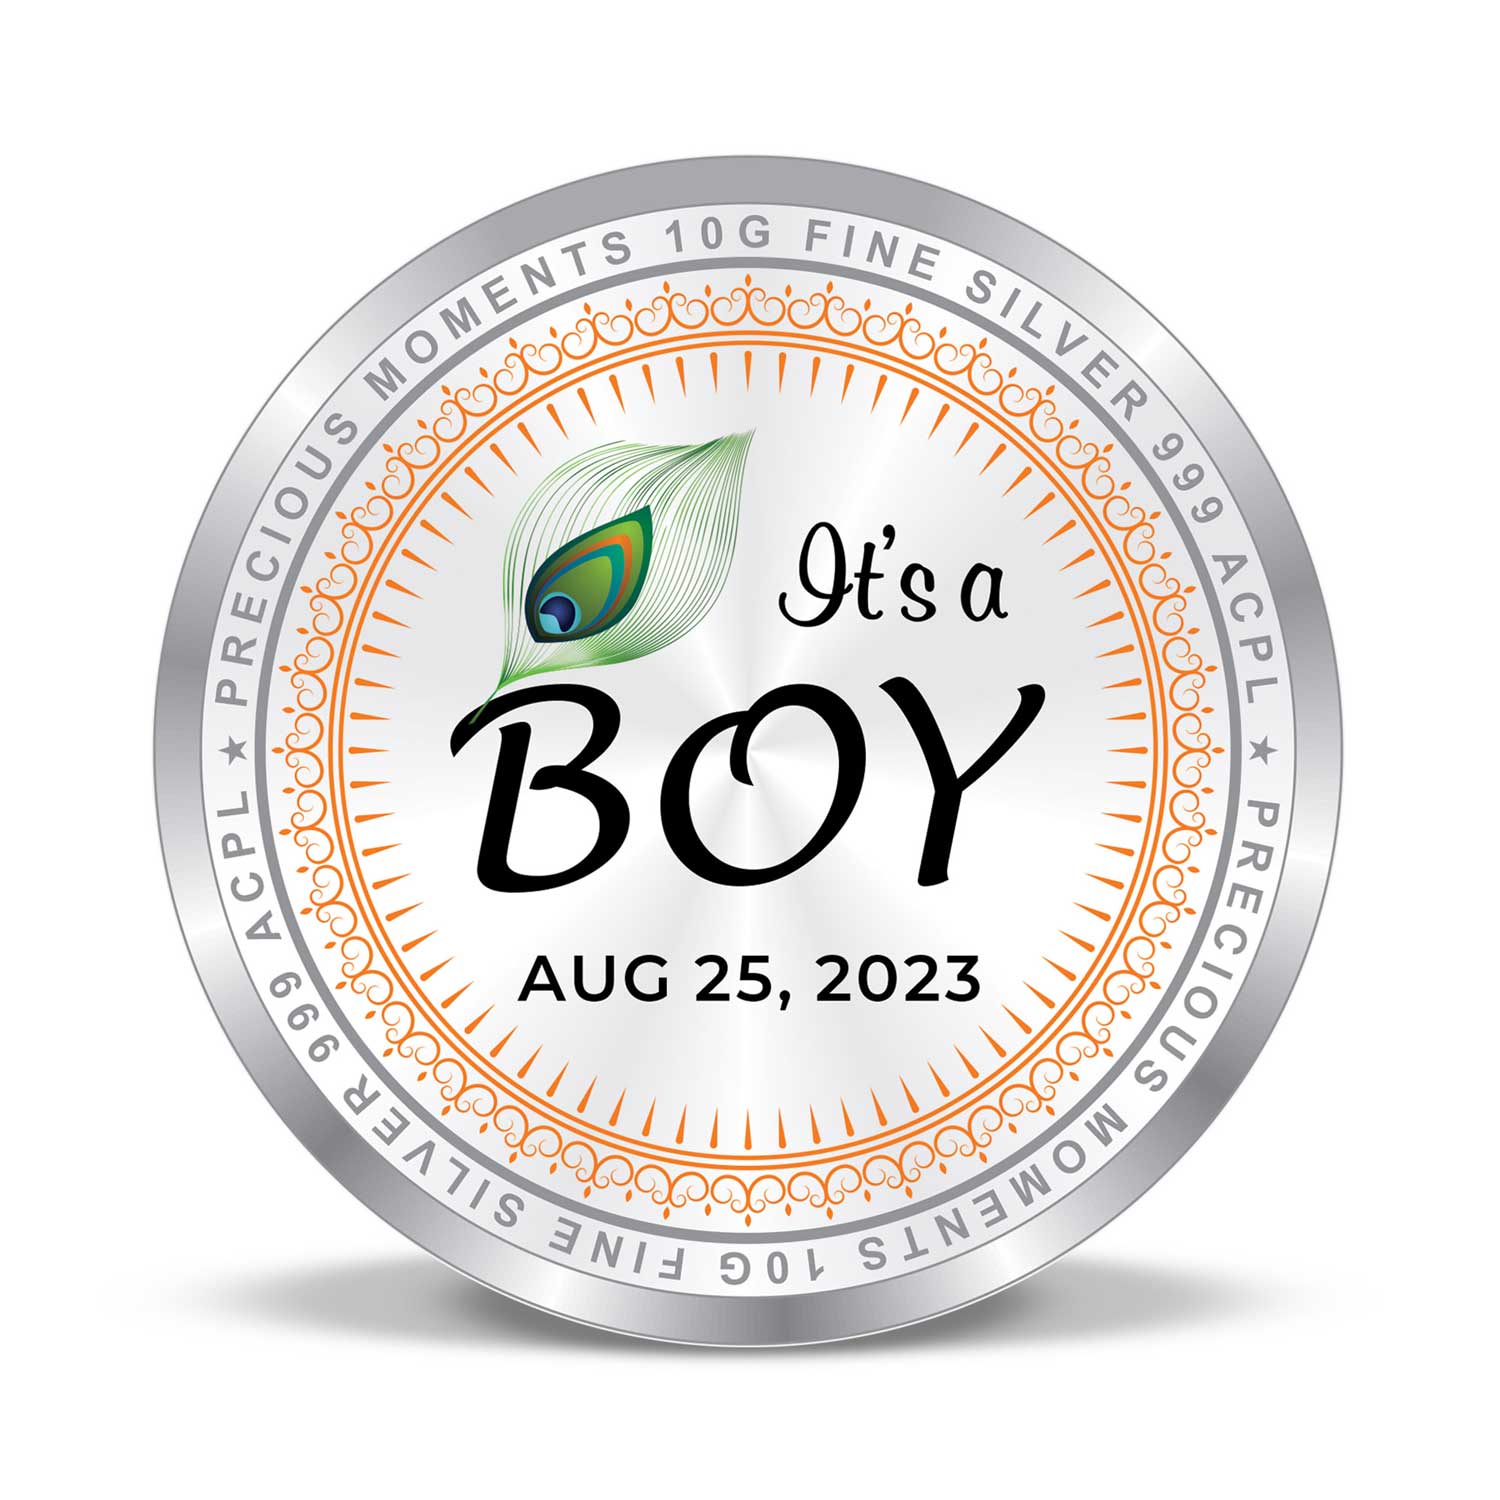 BIS Hallmarked Personalised New Born Baby Boy Round Silver Coin 999 Purity